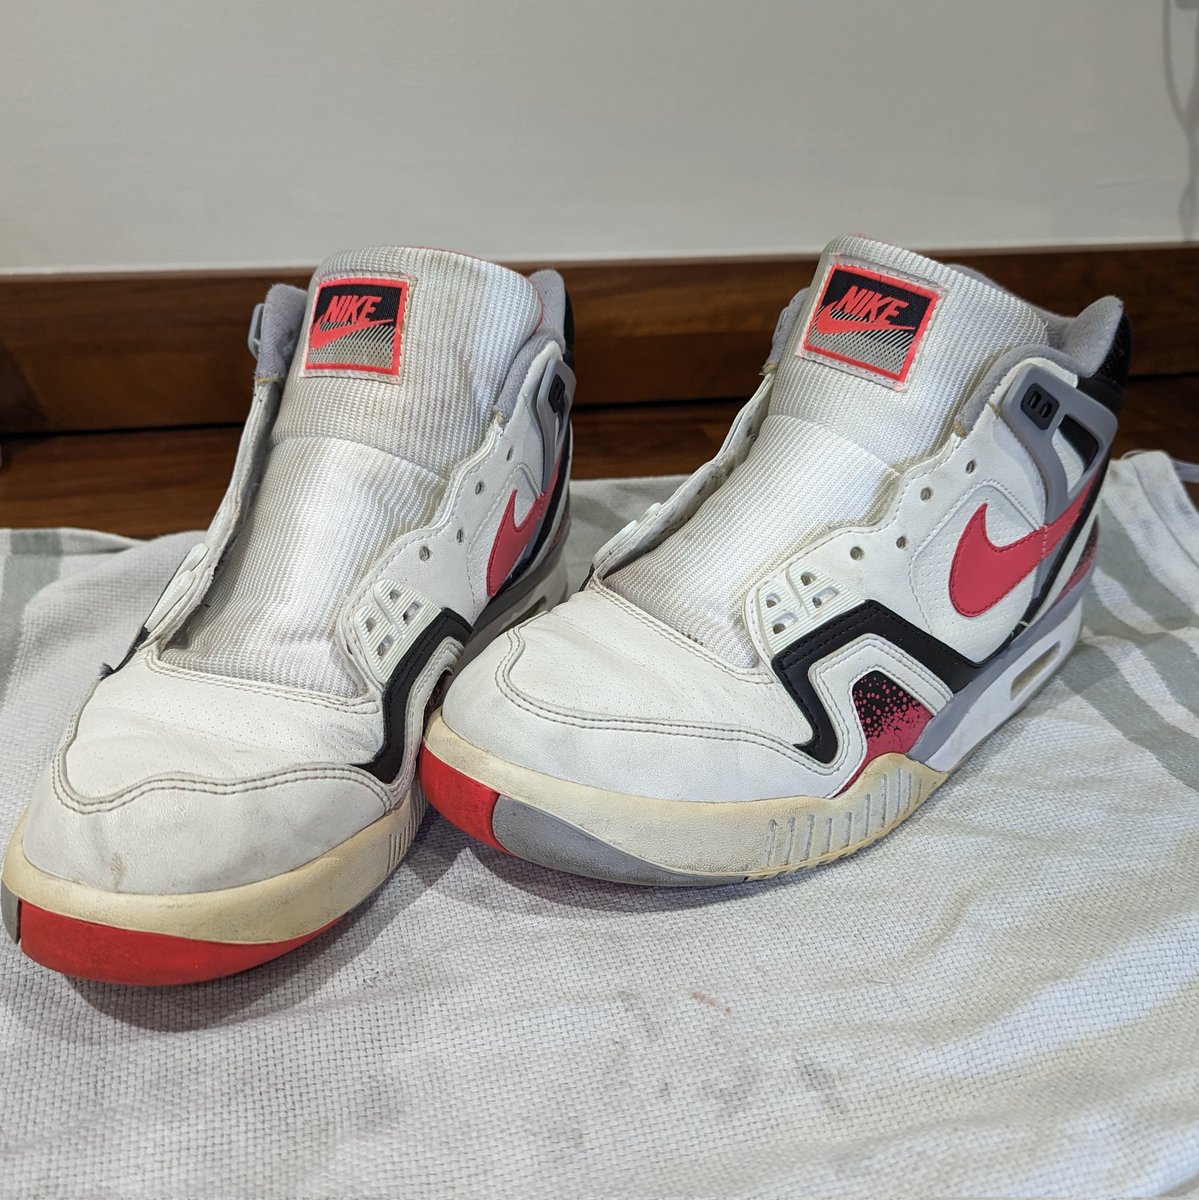 Operation clean up today. See if we can get these looking a bit better. Hoping to see these retro again some time soon. Would love a fresh pair
#nikeairtechchallengeii 
#agassi #nike #snkrsliveheatingup 
#sneakercleaning #niketennis
#kotd #sneakerpics #hotlava